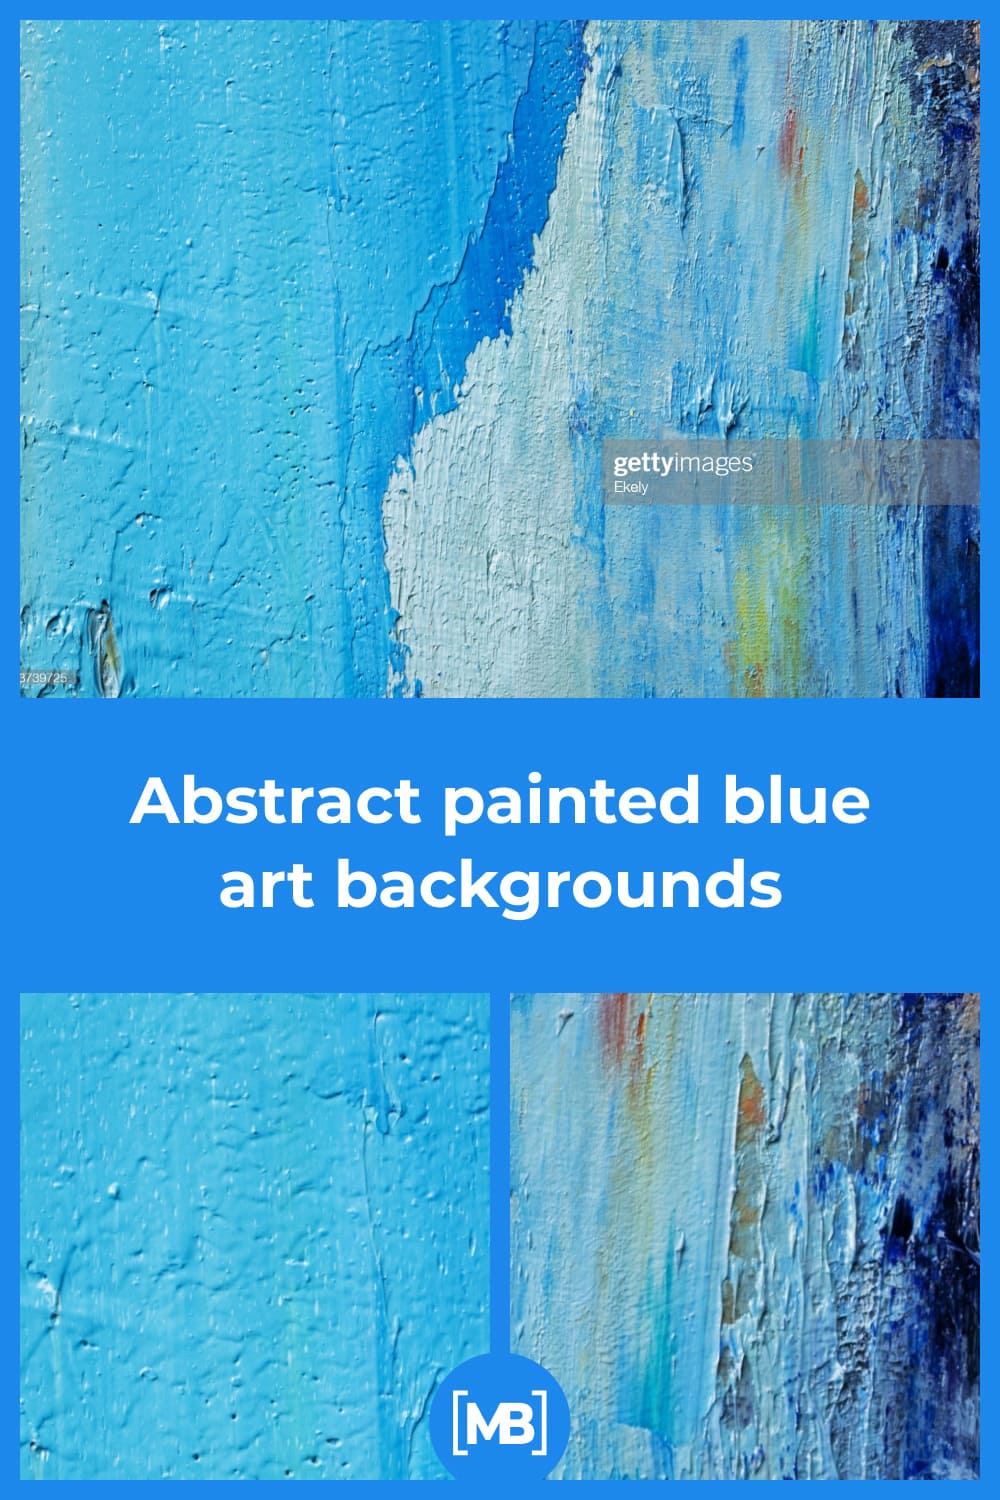 It's an explosion of blue and blue in even strokes.